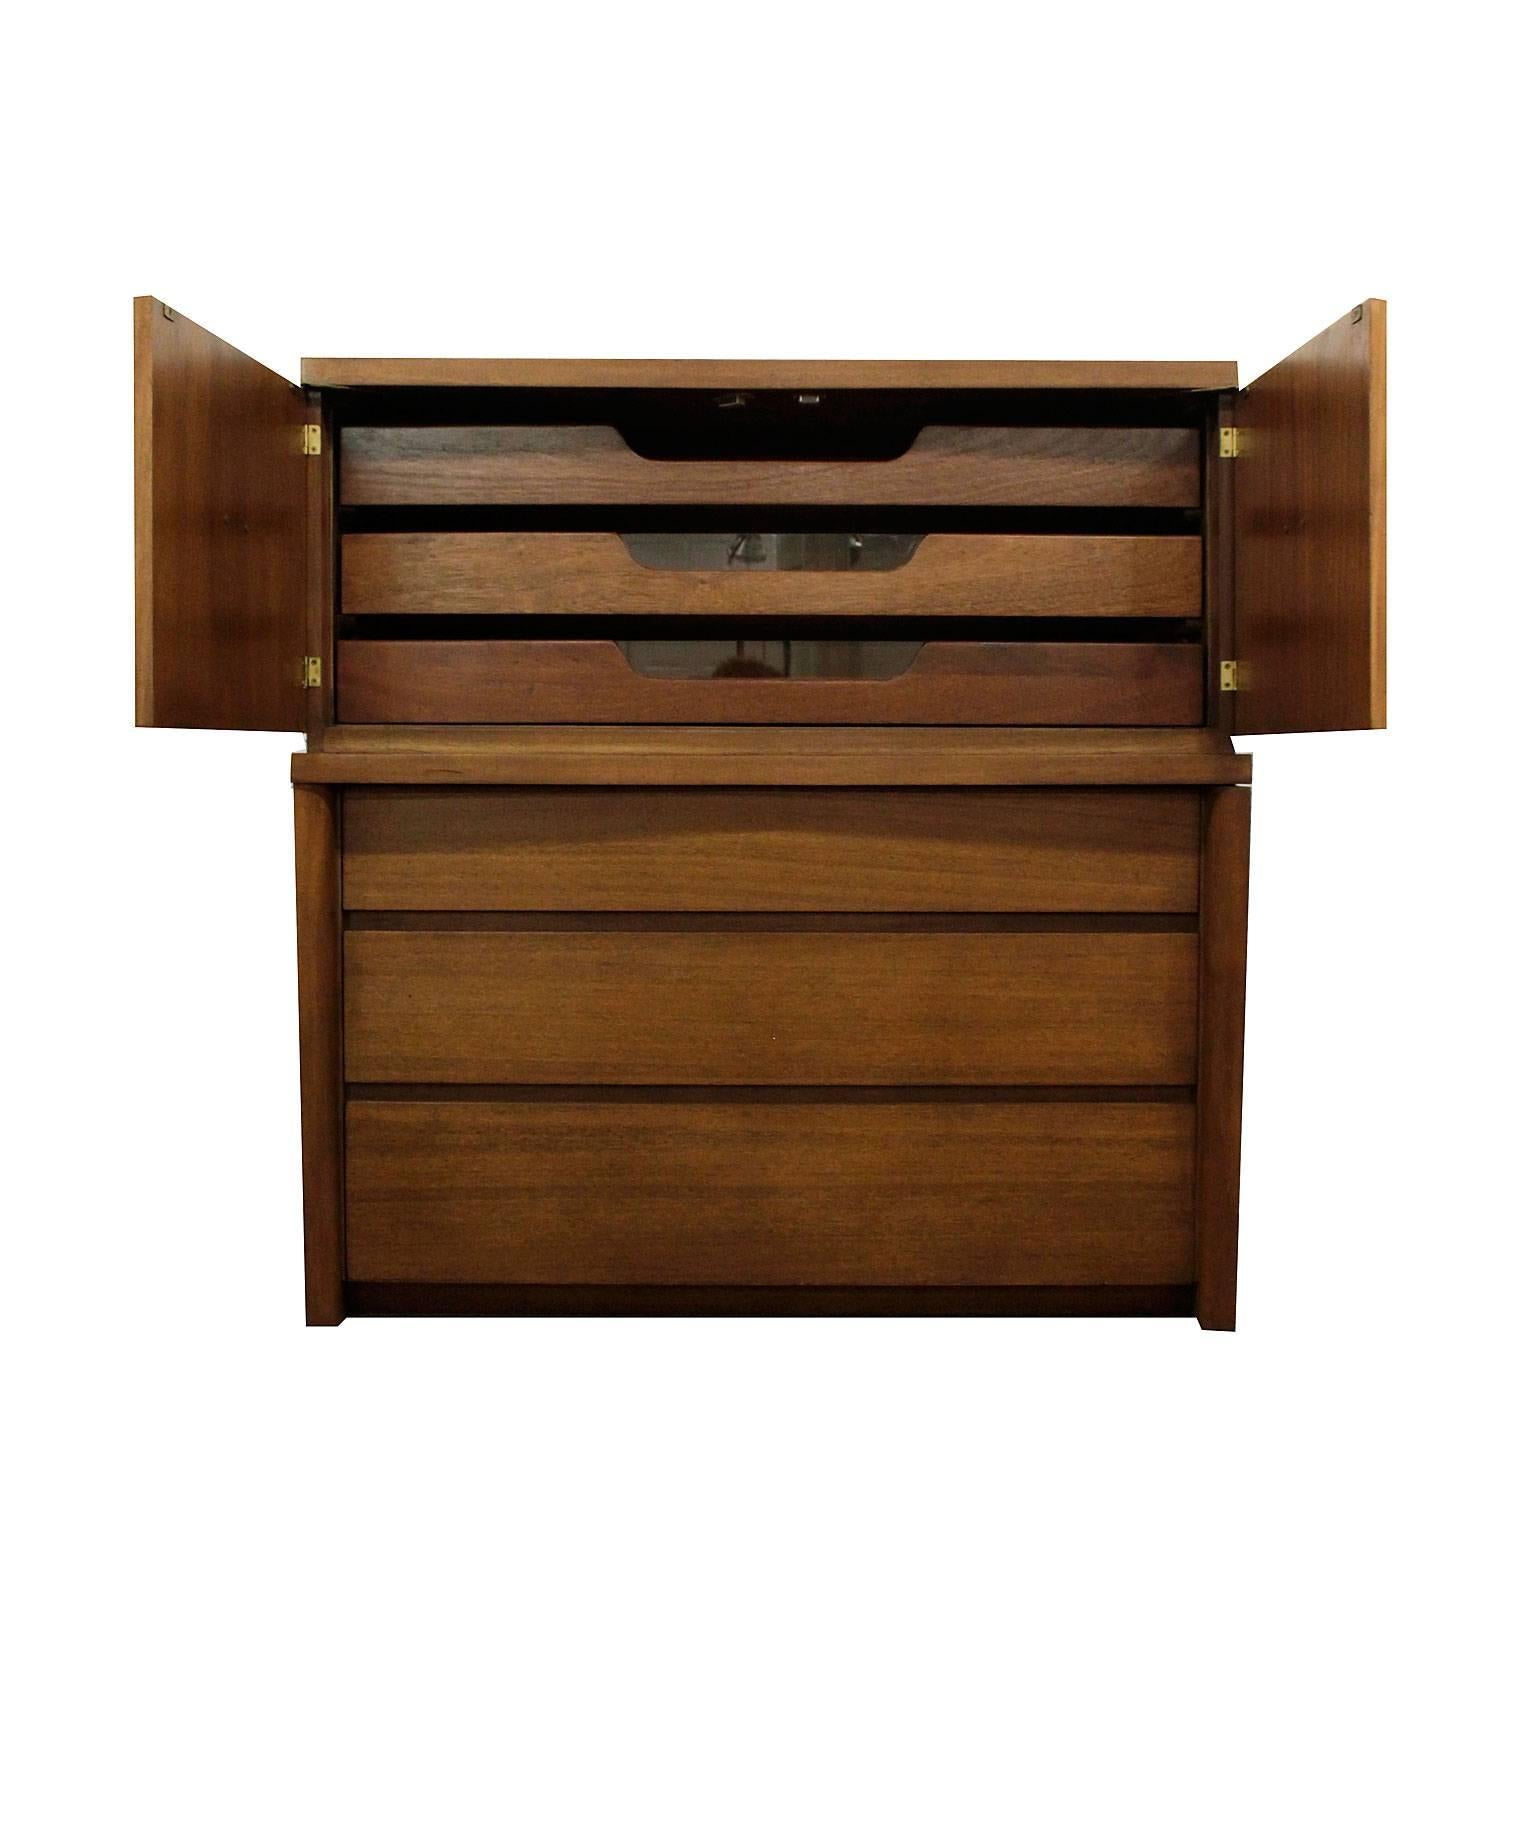 Stunning vintage mahogany high boy dresser by Benson Furniture of Oregon. A perfect blend of Mid-Century Modern and Art Deco elements with outstanding American craftsmanship. The monumental form balanced by smartly styled angles and softened by